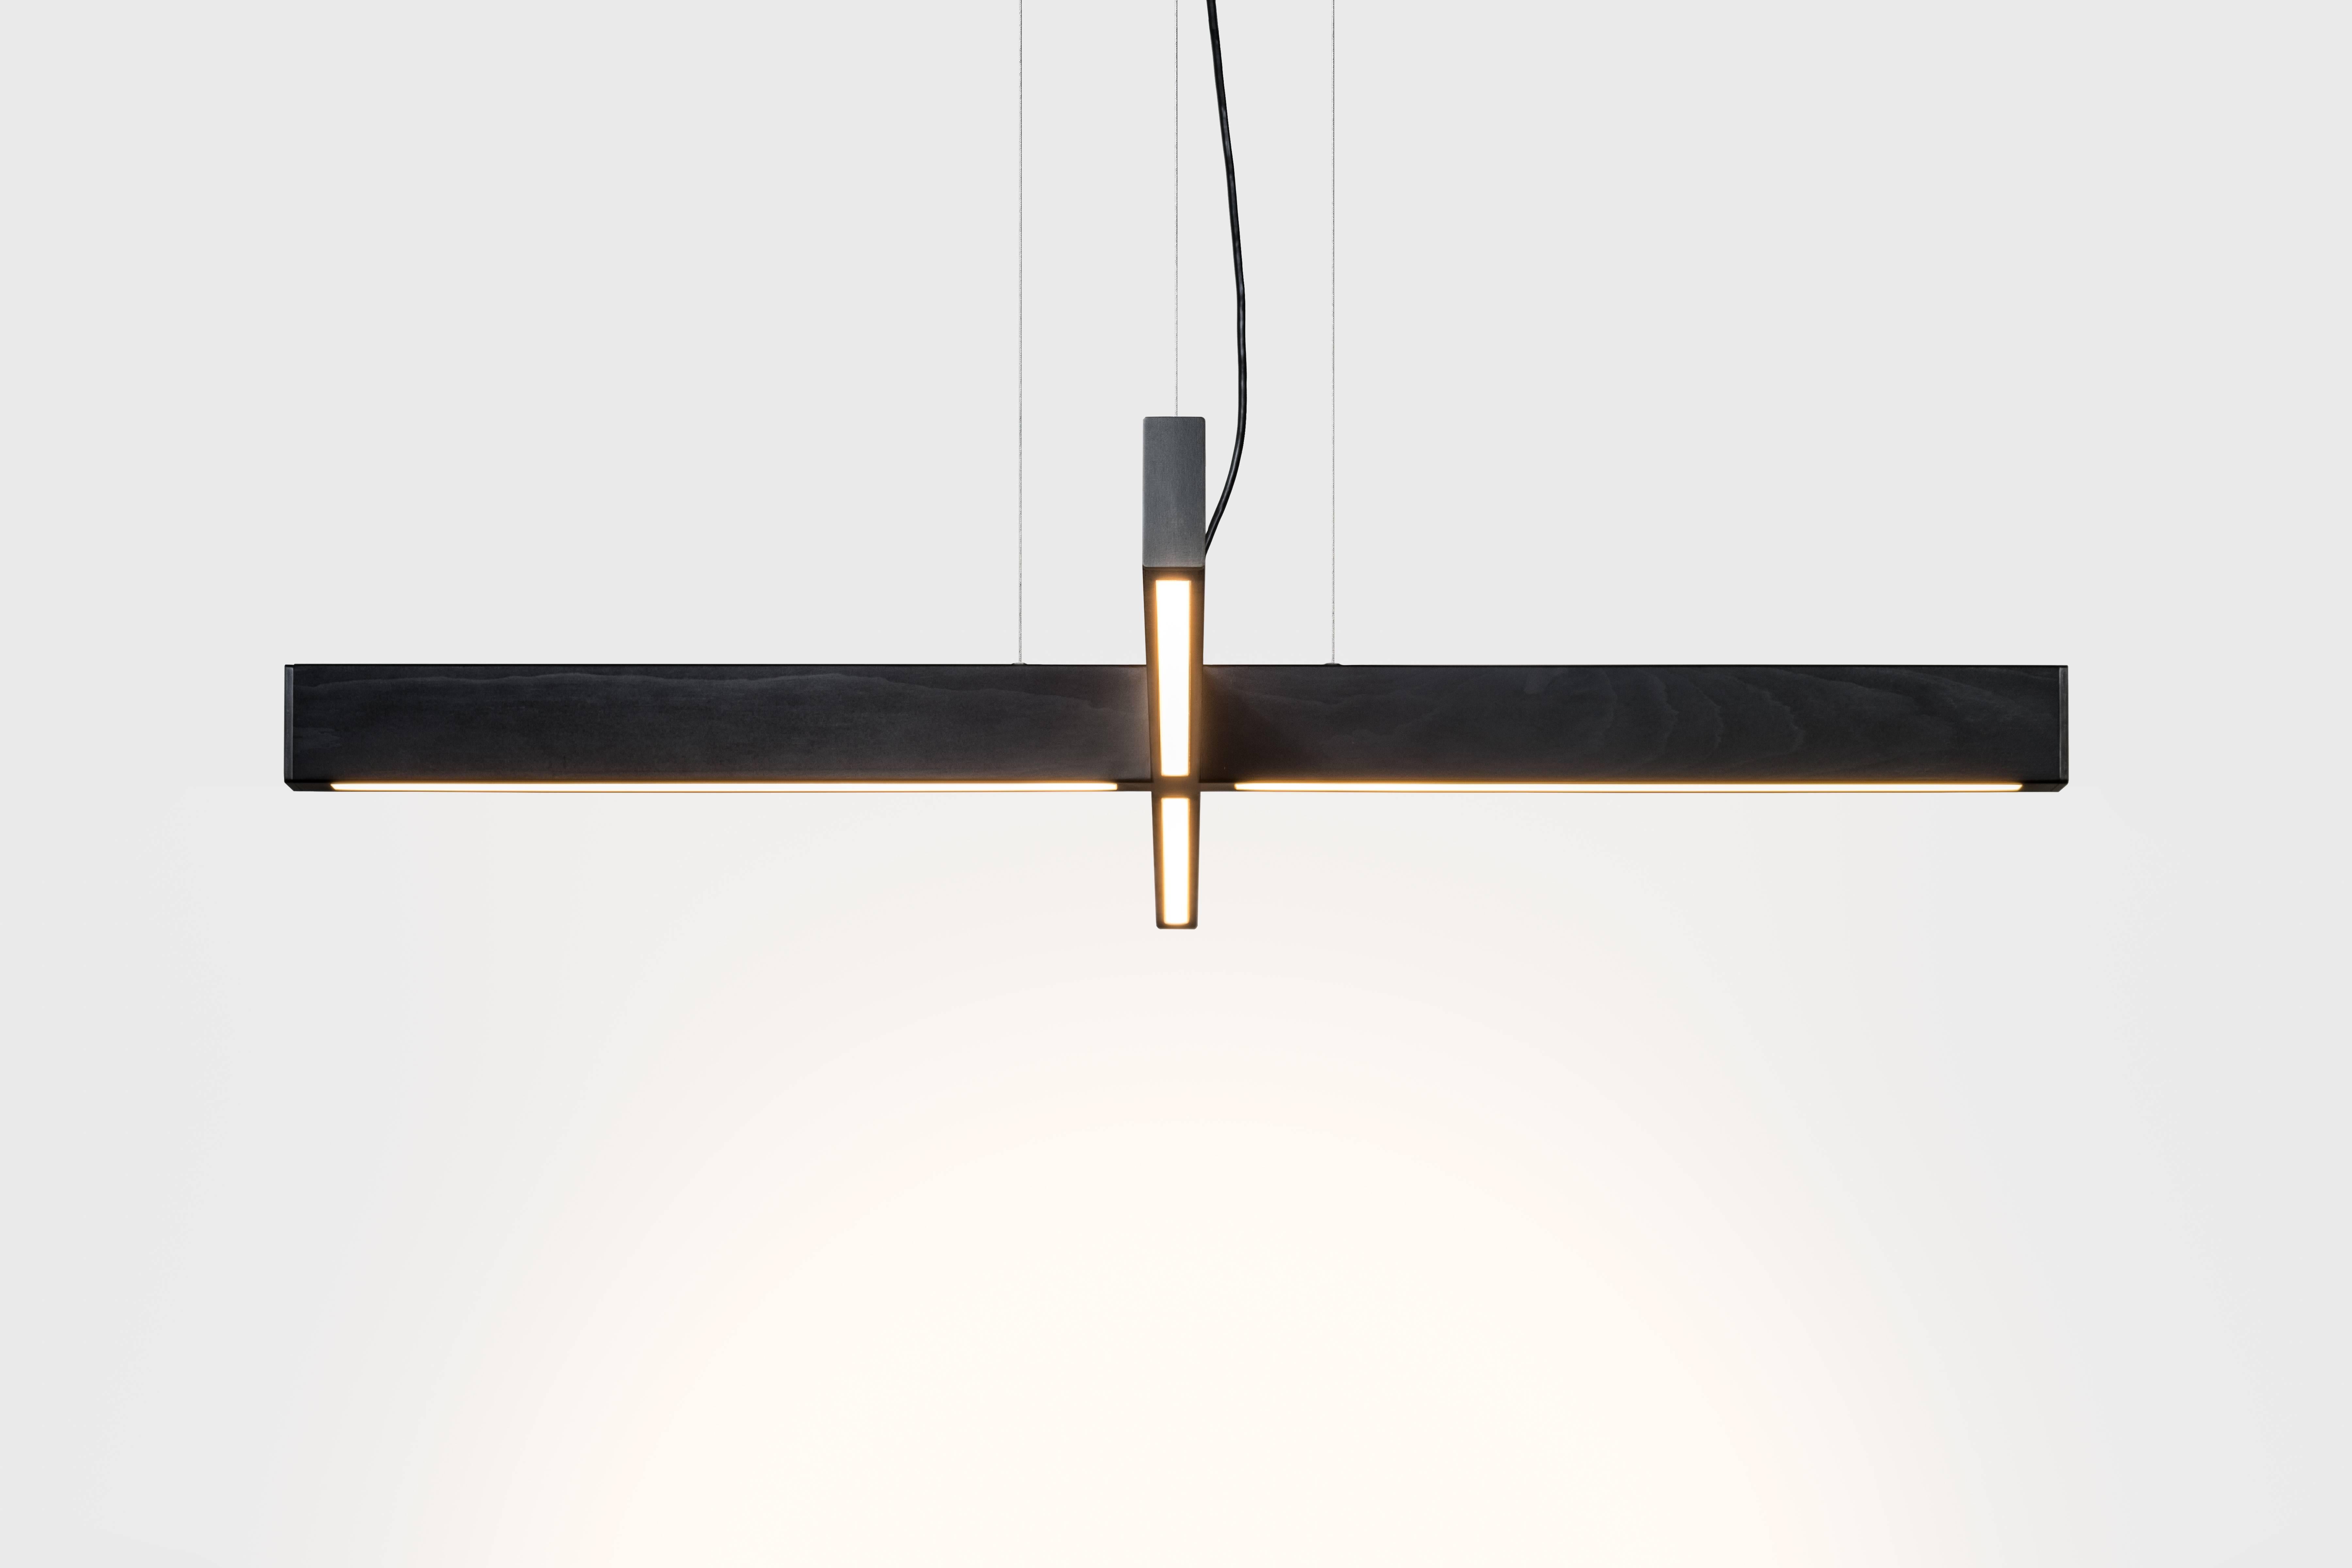 The 2x4 Plus Pendant expands on our classic 2x4 pendant, exploring new relationships through the intersection of the wood bodies. Minimal in form, the Plus Pendant is still large in its presence.

Custom finishes and sizes available upon request.